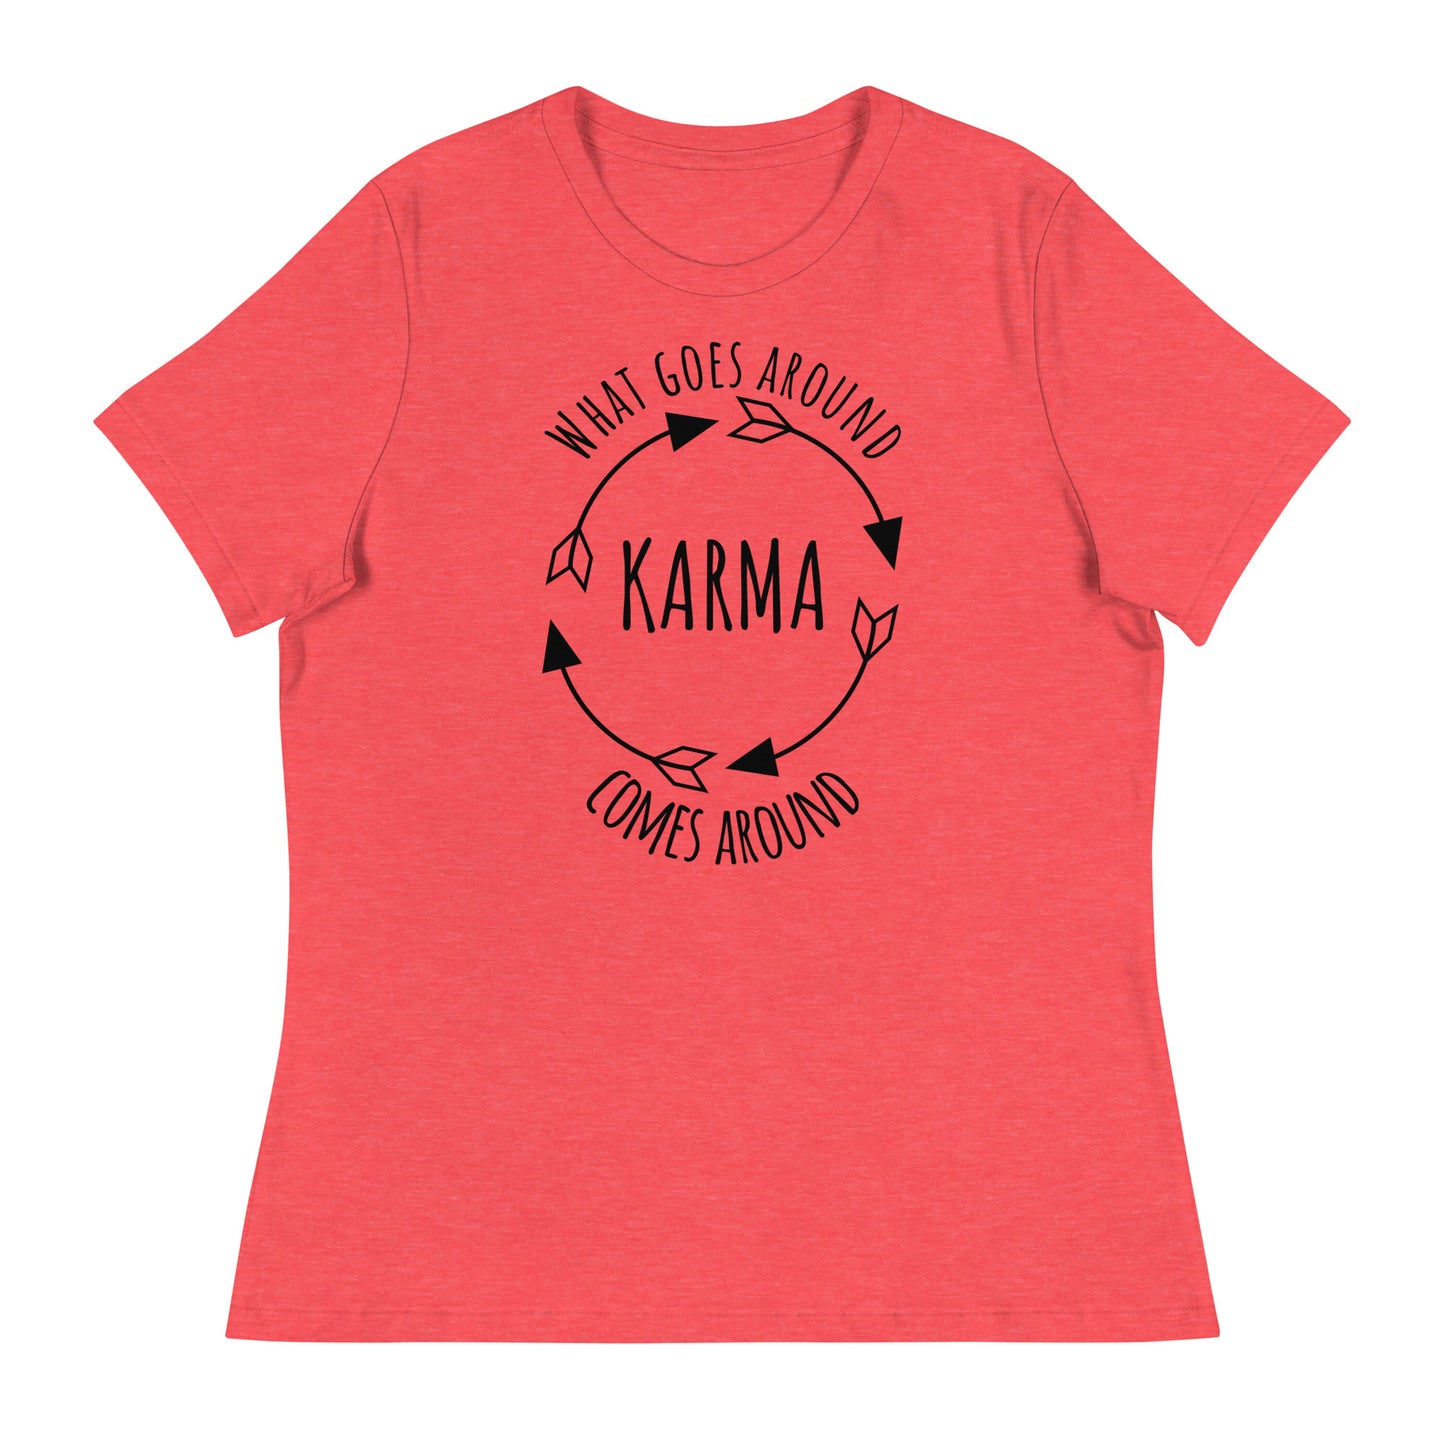 KARMA - what goes around comes around women's tee (black lettering)